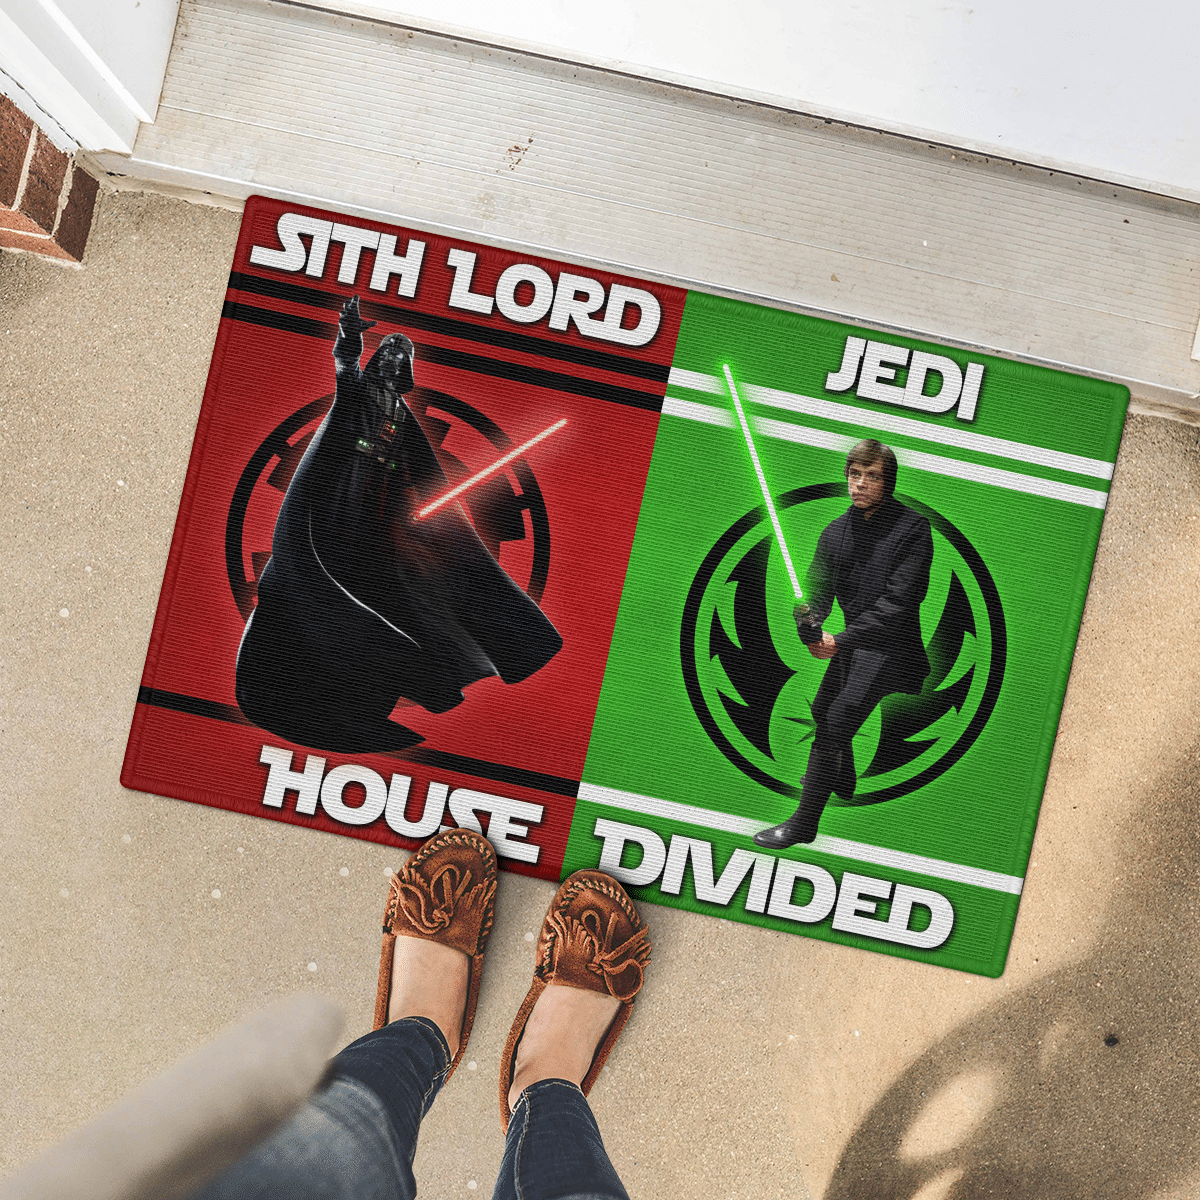 Sith Lord and Jedi house divided doormat – LIMITED EDITION